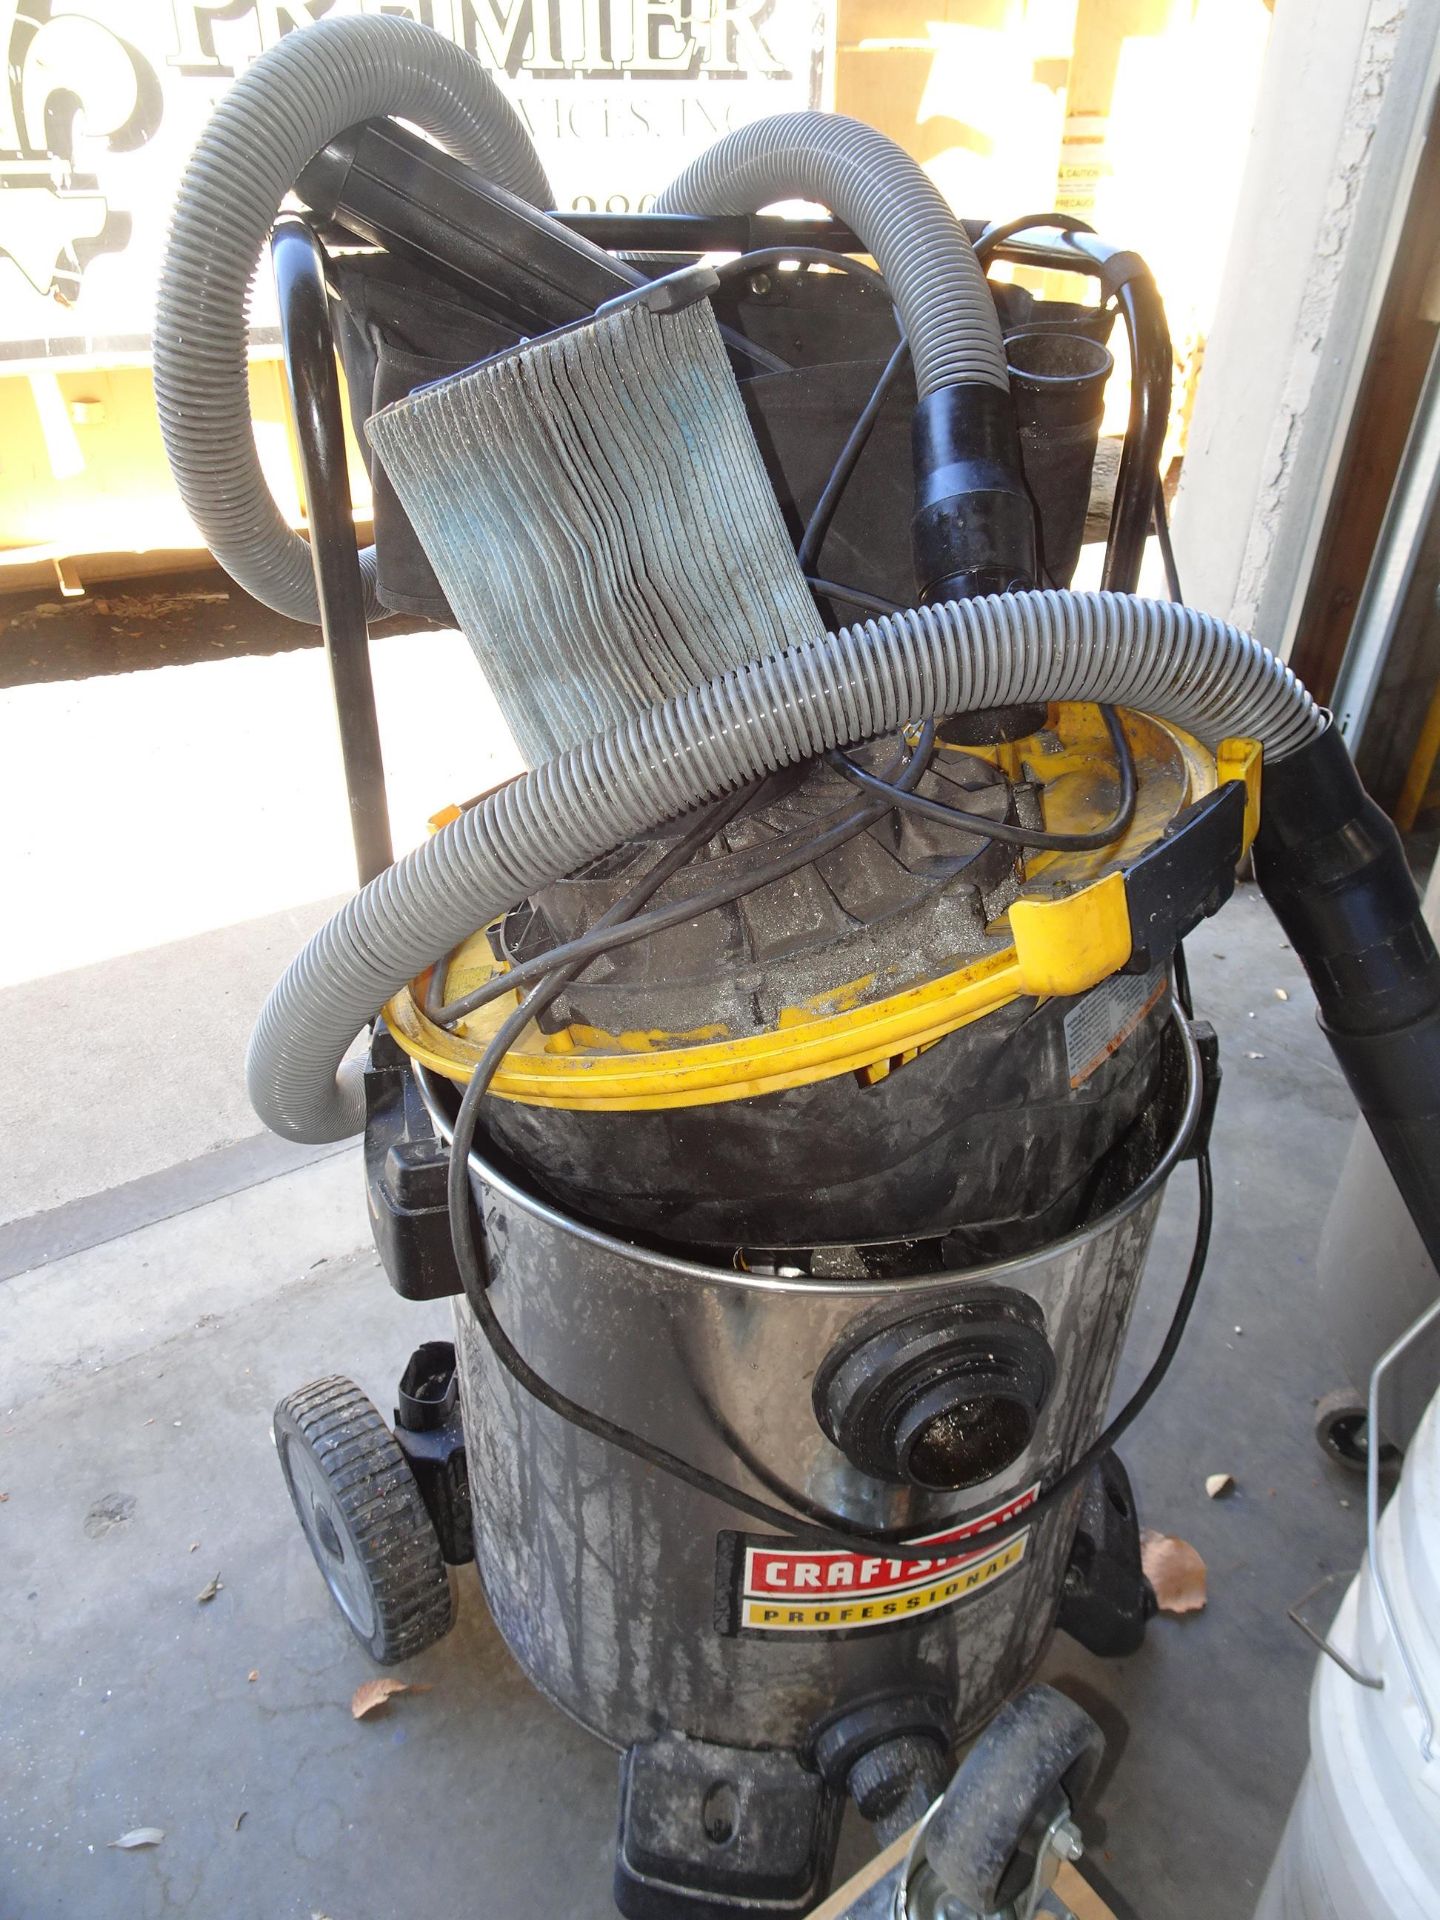 Lot of Cleaning Supplies: Craftsman Shop Vac; Trash Cans w/ Dollies; Buckets; Wood Dollies; Etc. - Image 2 of 4